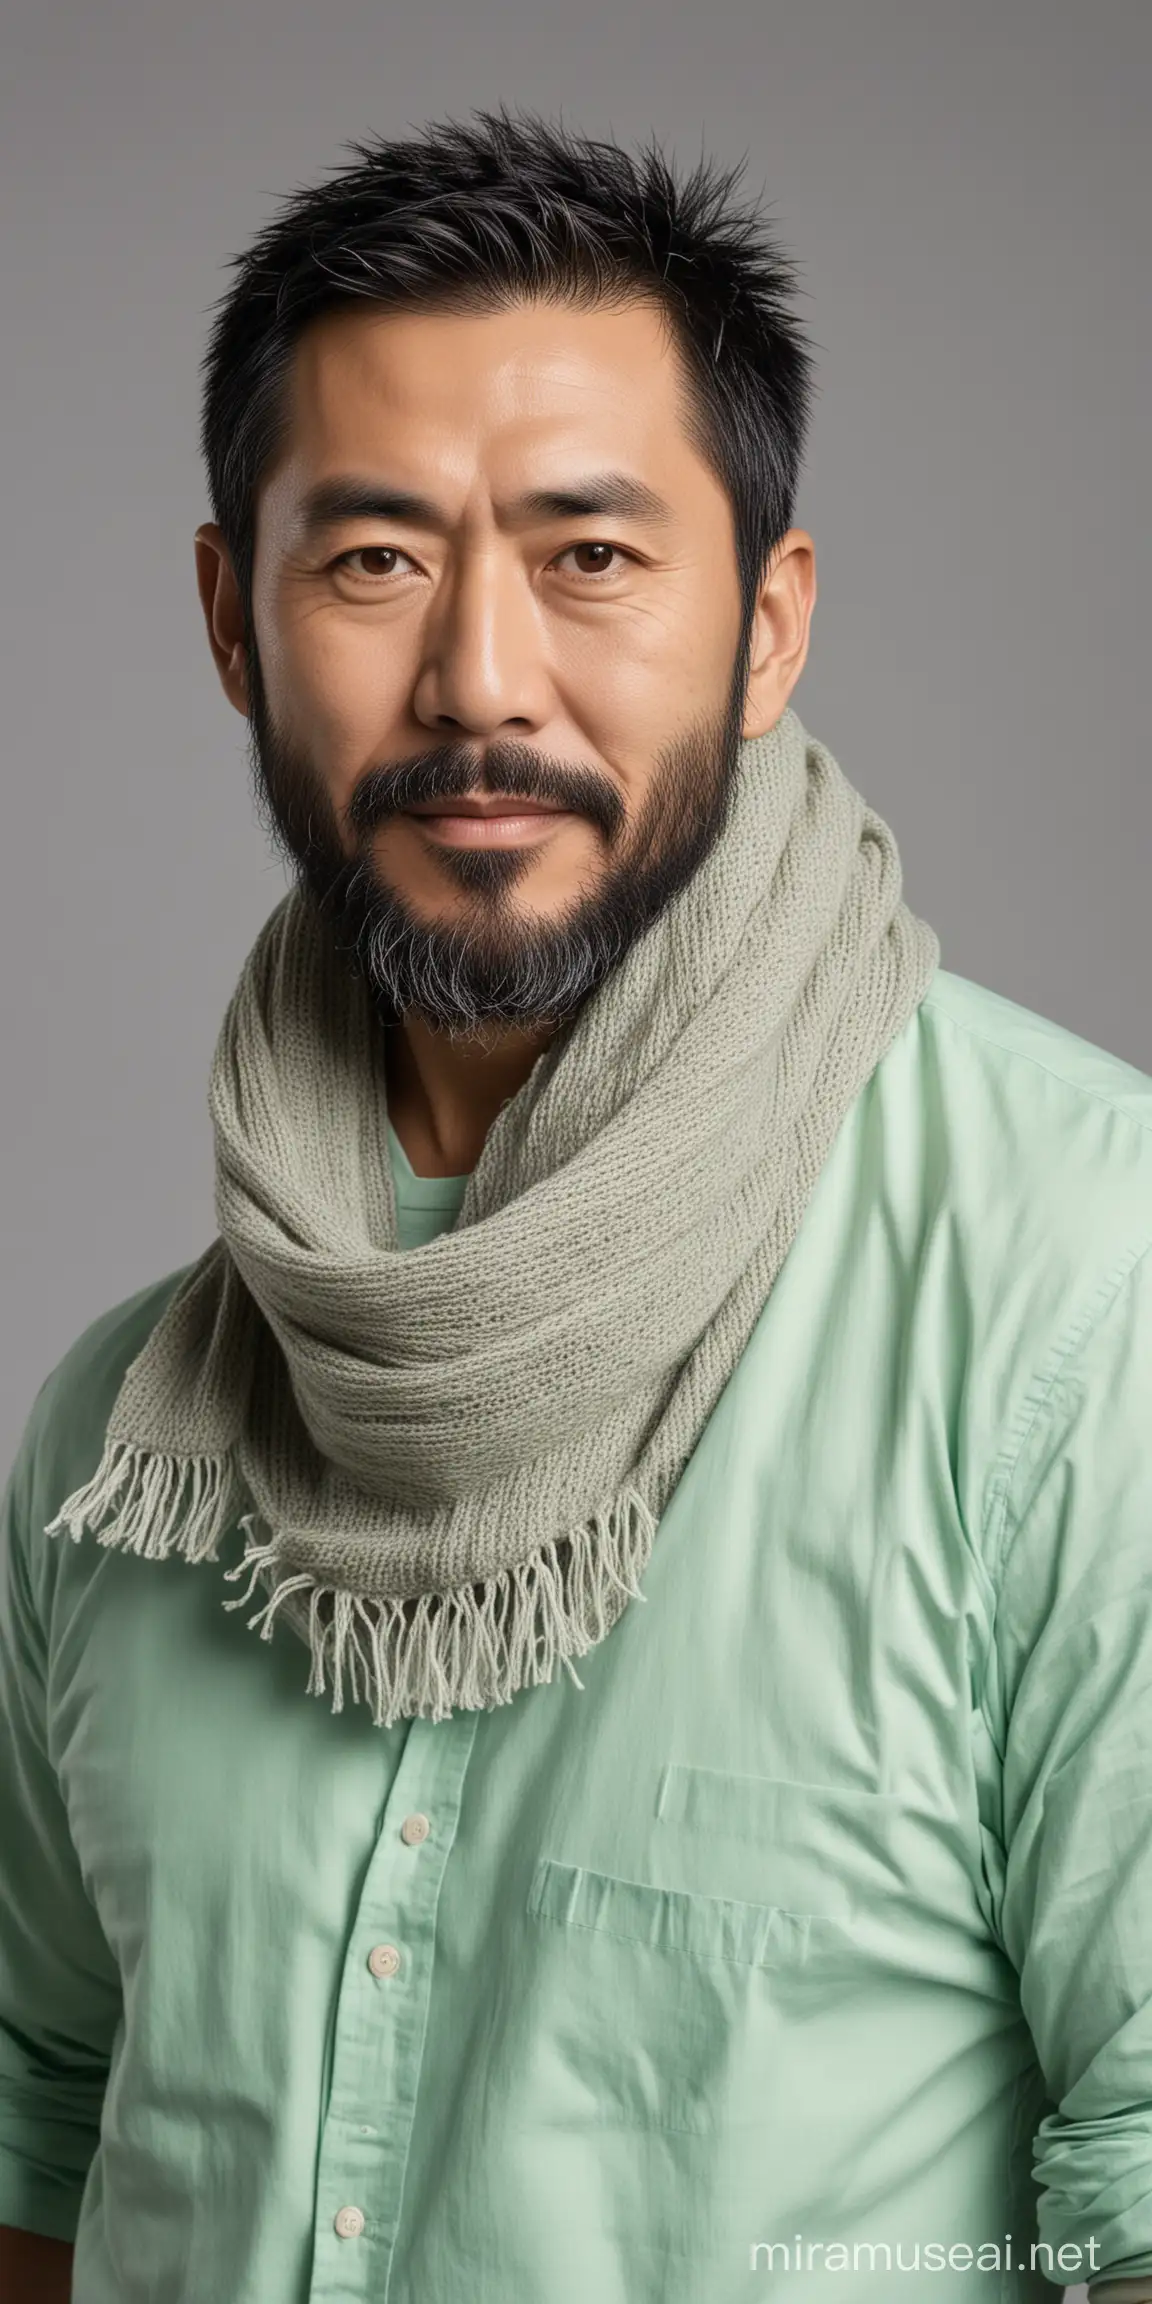 Muscular Japanese MiddleAged Man in Mint Green Shirt and Scarf